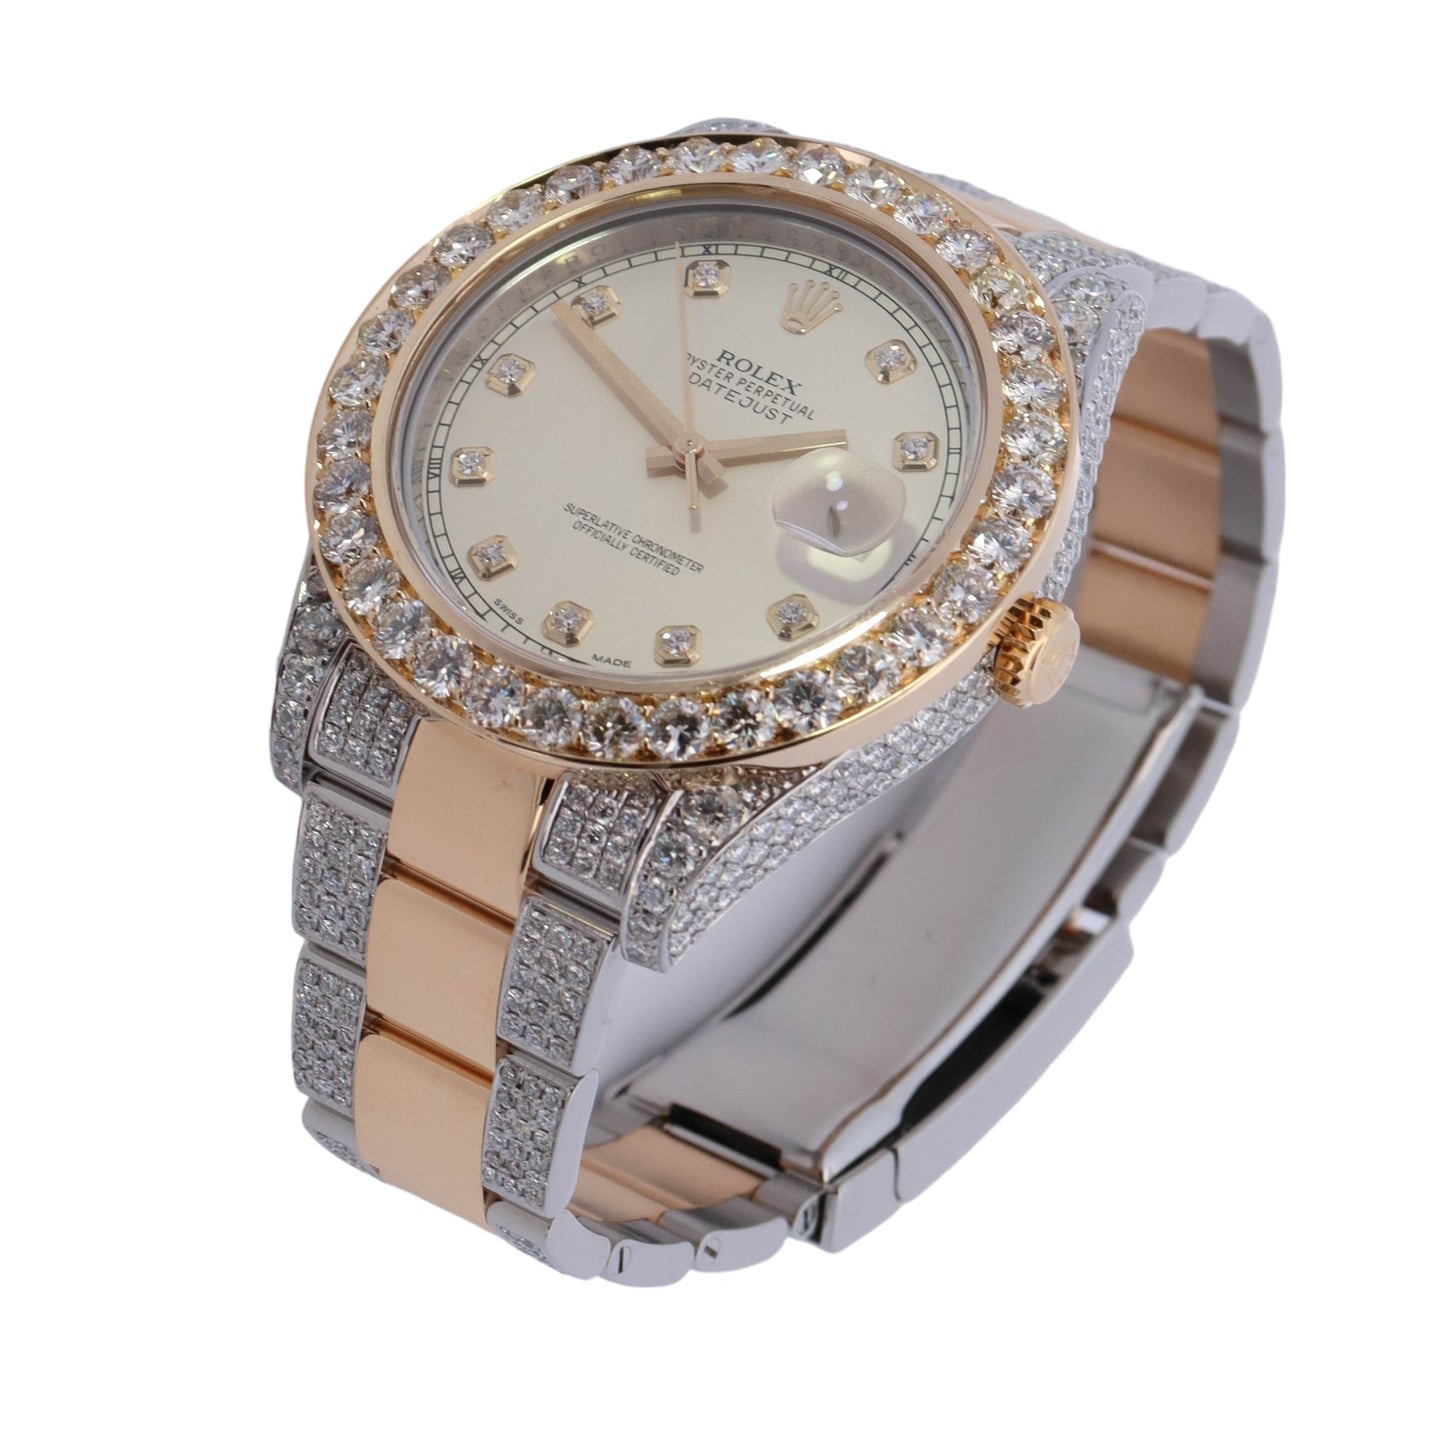 Rolex Datejust II Two Tone Yellow Gold & Steel 41mm Ivory Diamond Dial Watch Reference #: 116333